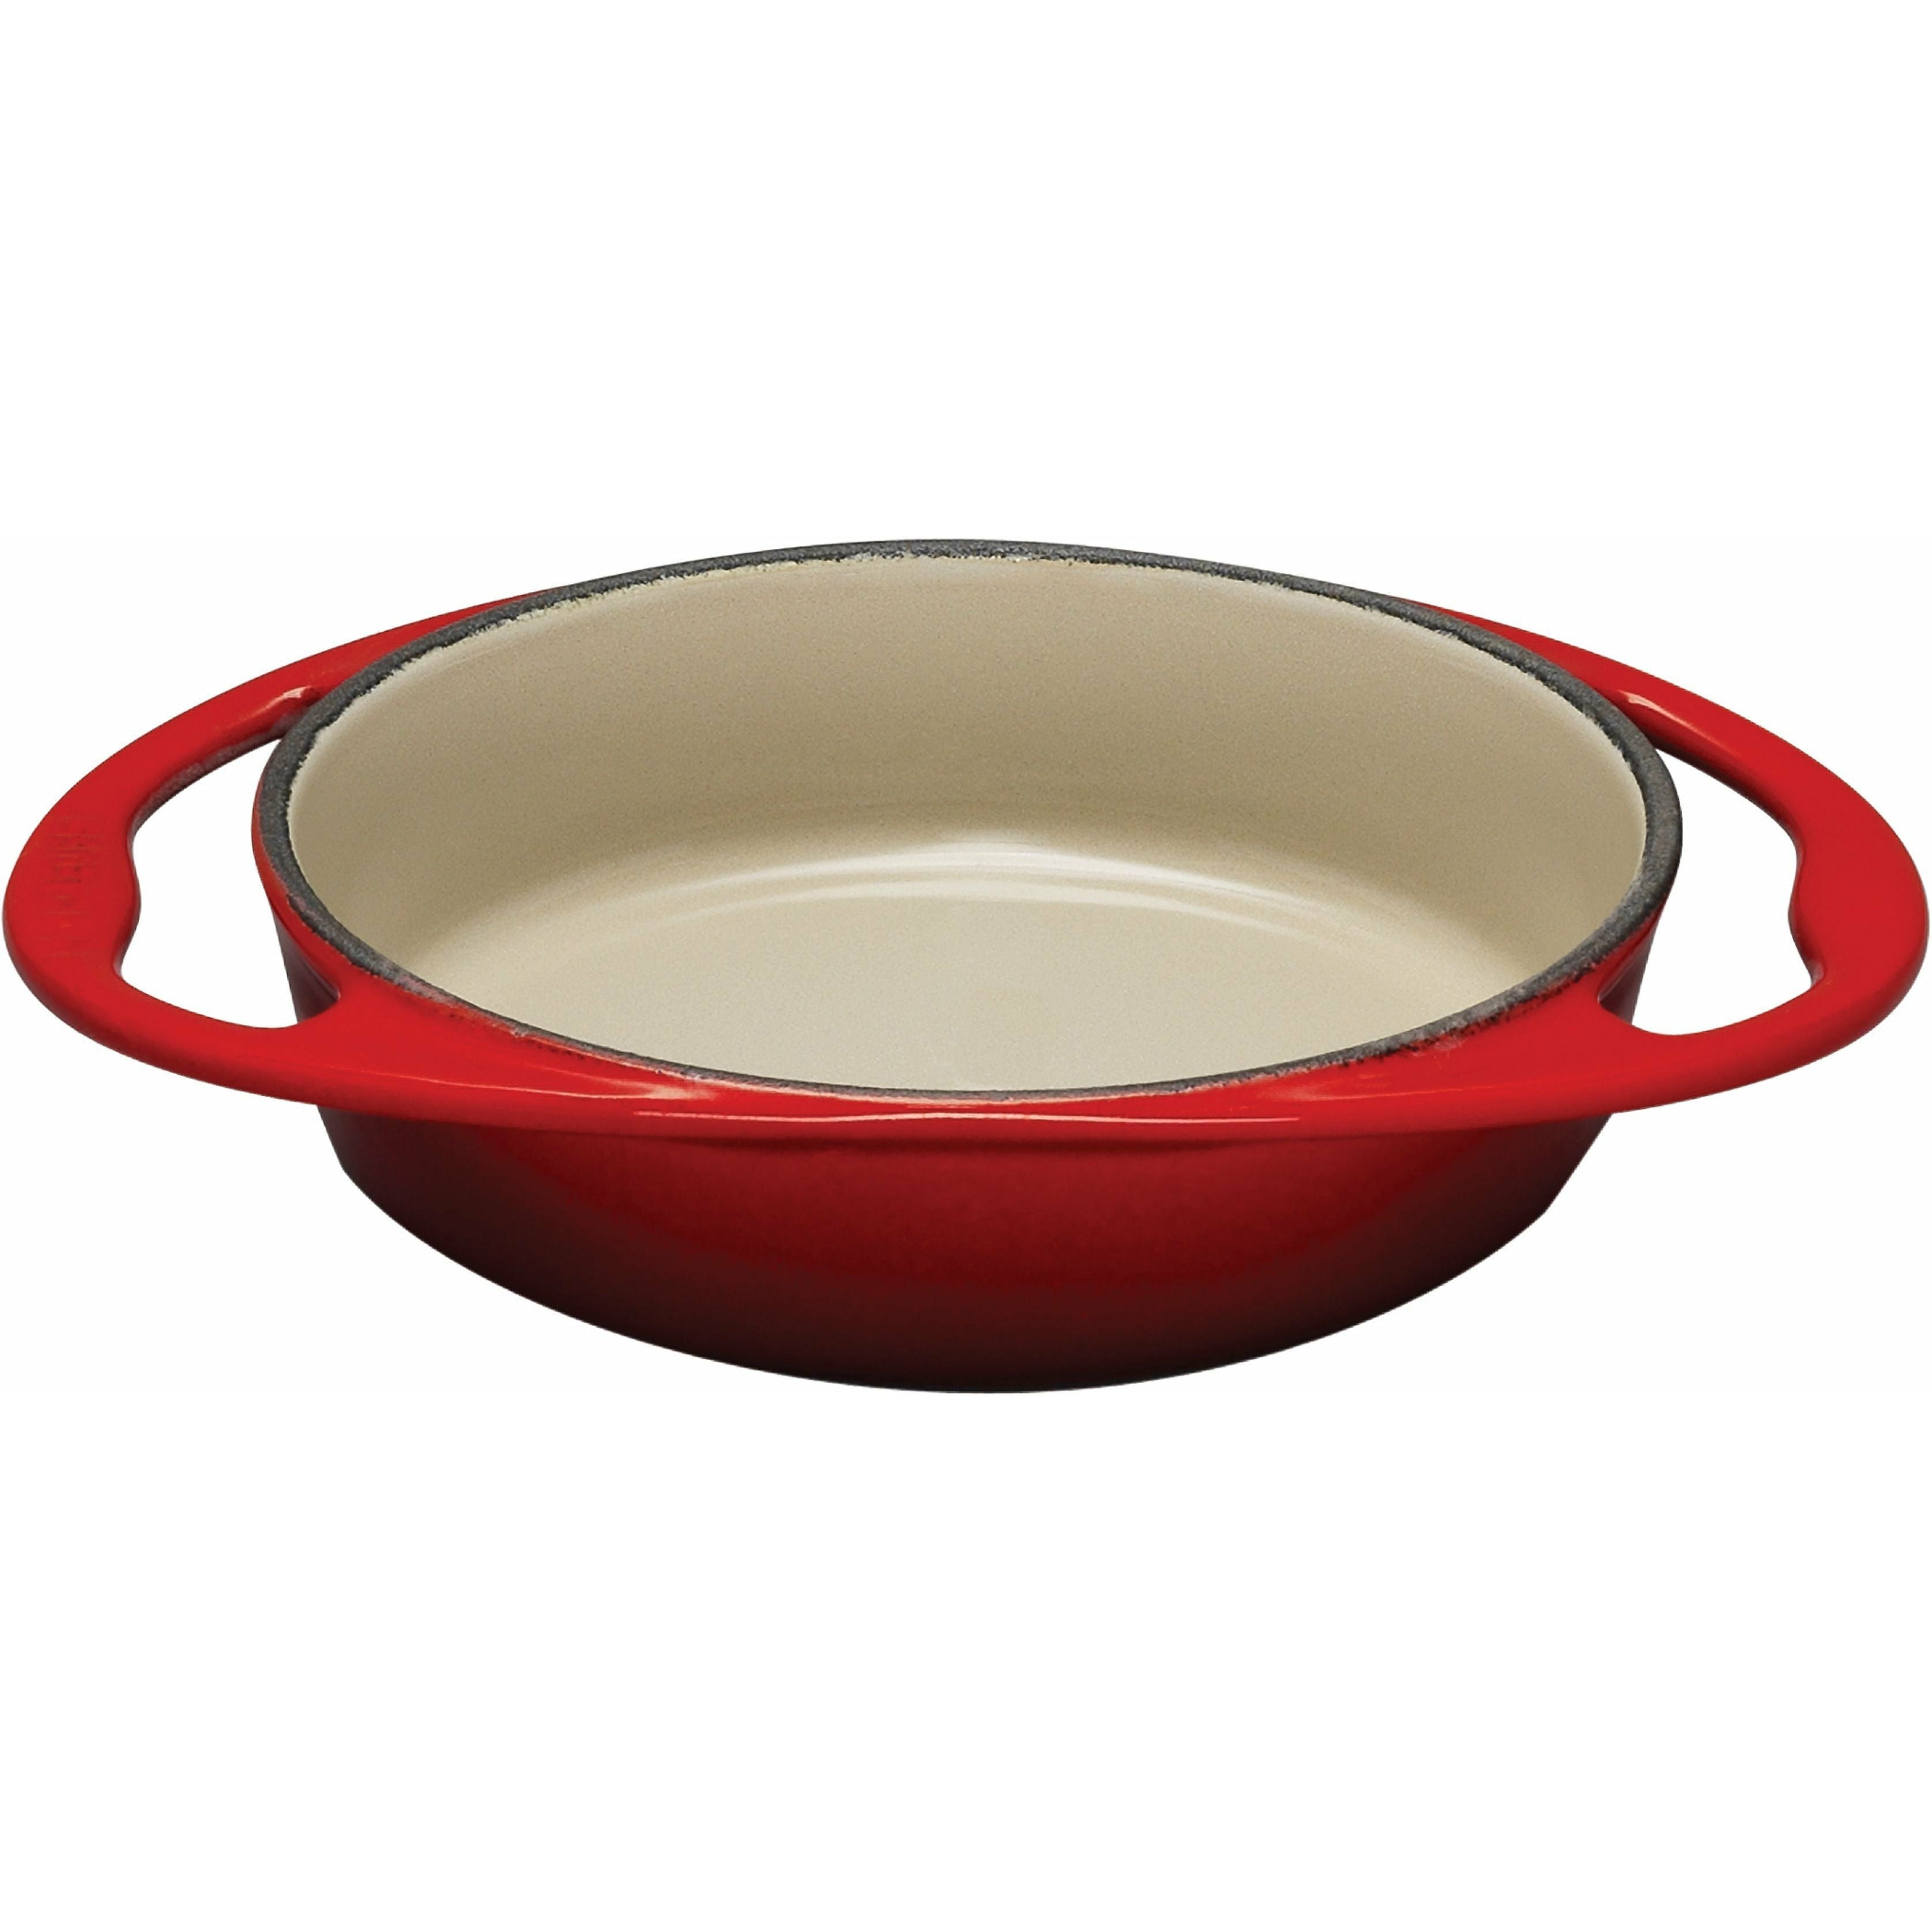 Le Creuset Tradition Tatin Baking Pan 25 Cm, Cherry Red